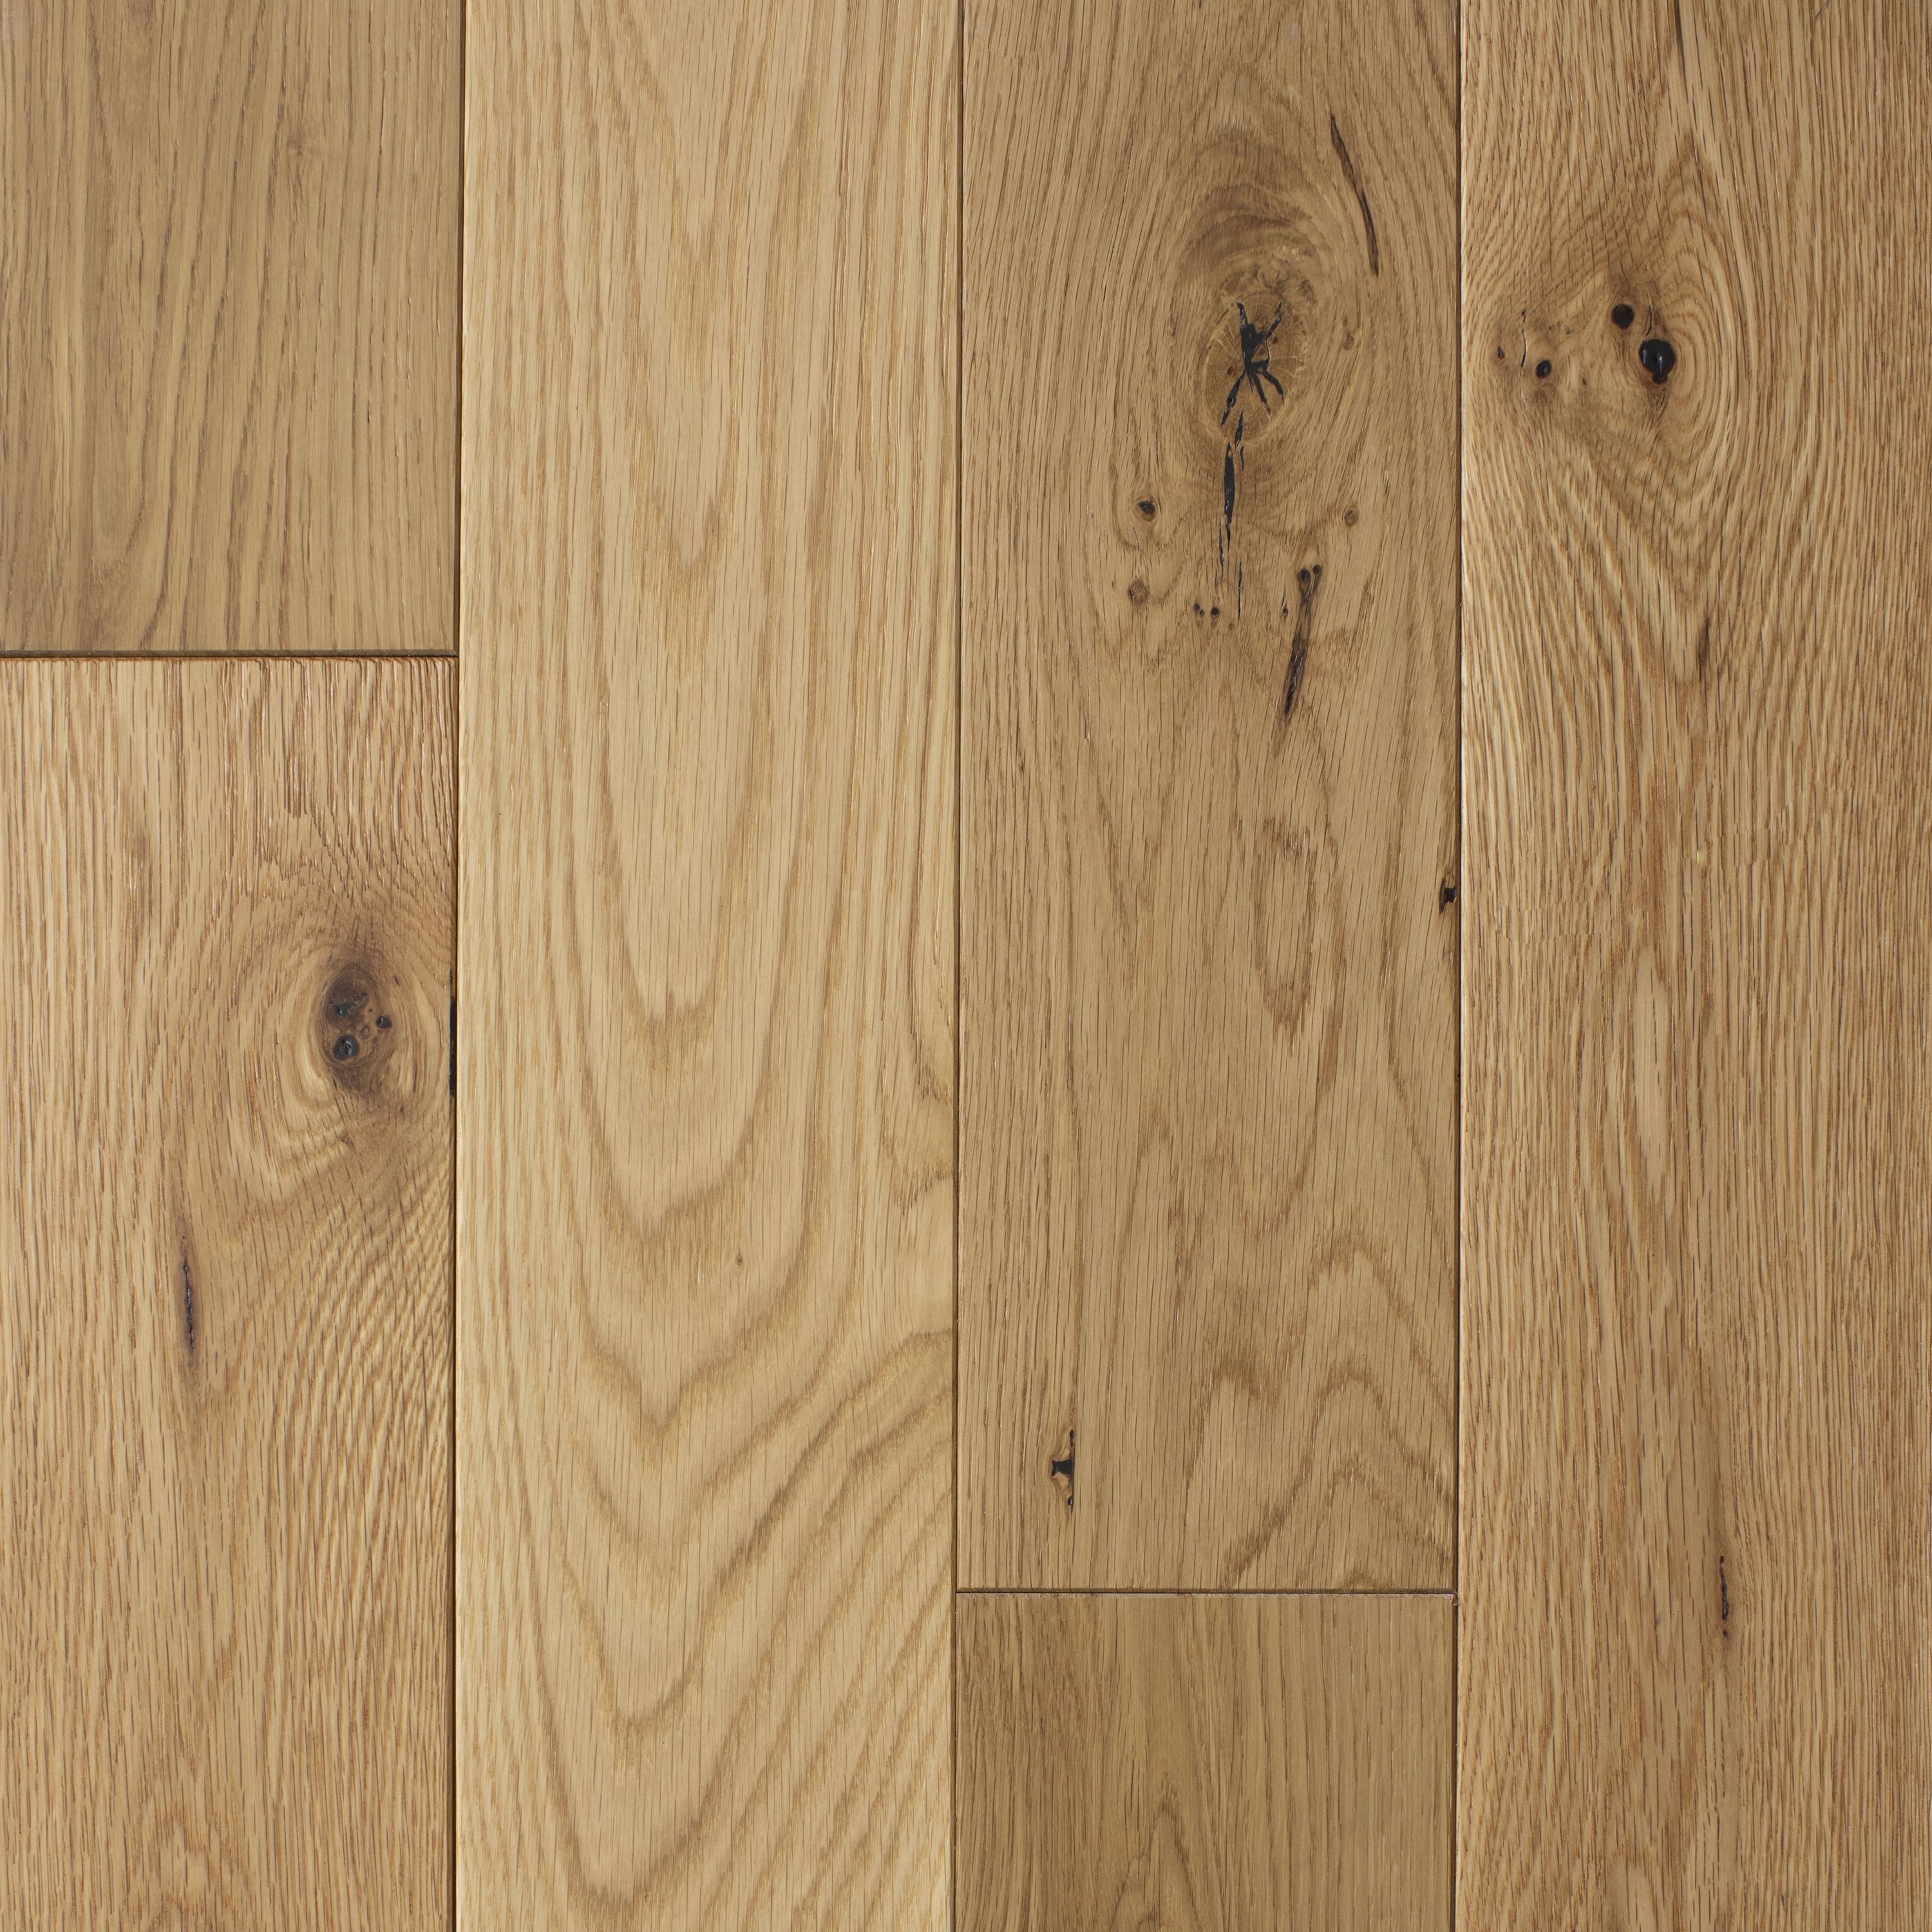 Natural White Oak 4-in W x 3/4-in T x Varying Length Wirebrushed Solid Hardwood Flooring (16-sq ft) in Brown | - Green Leaf 24806